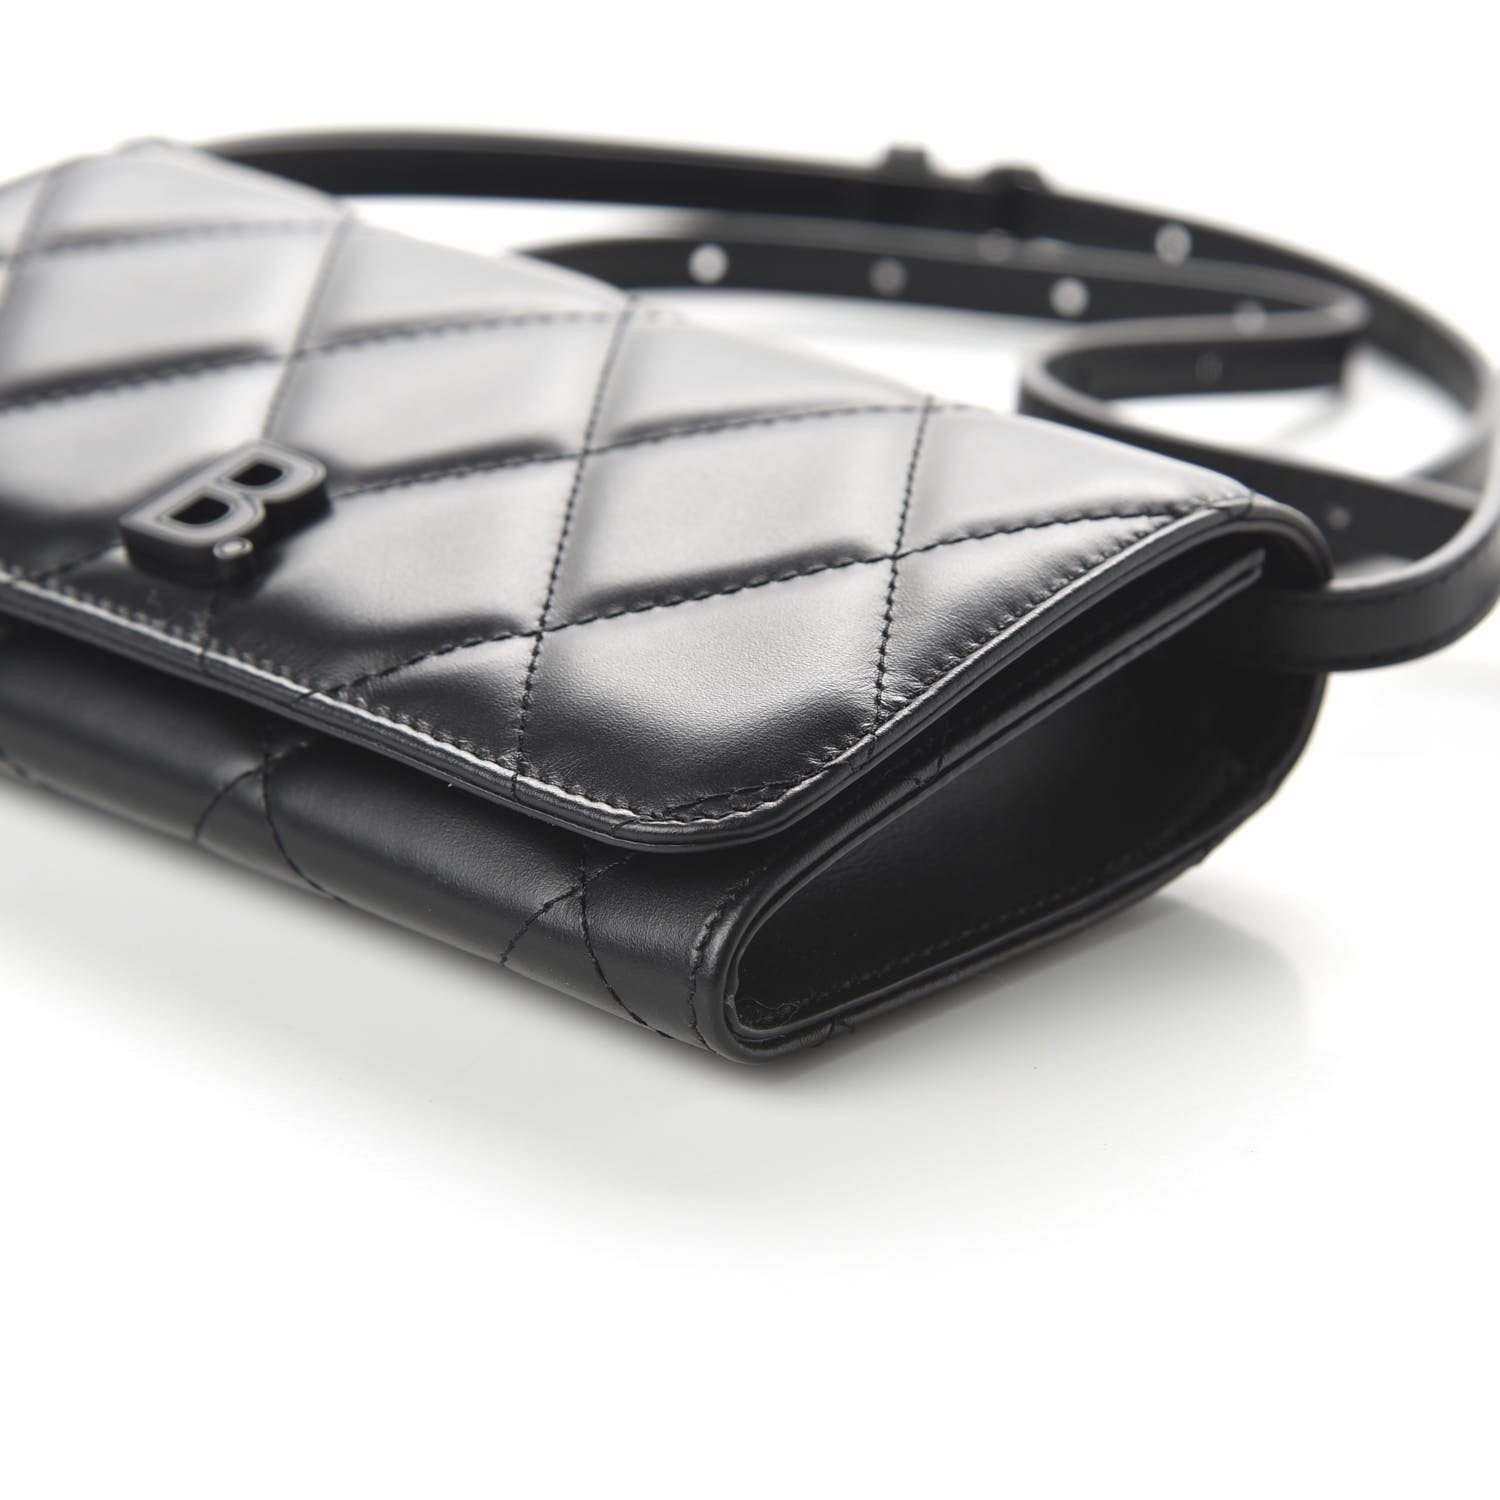 BALENCIAGA Calfskin Quilted Phone Holder With Strap Black 686605